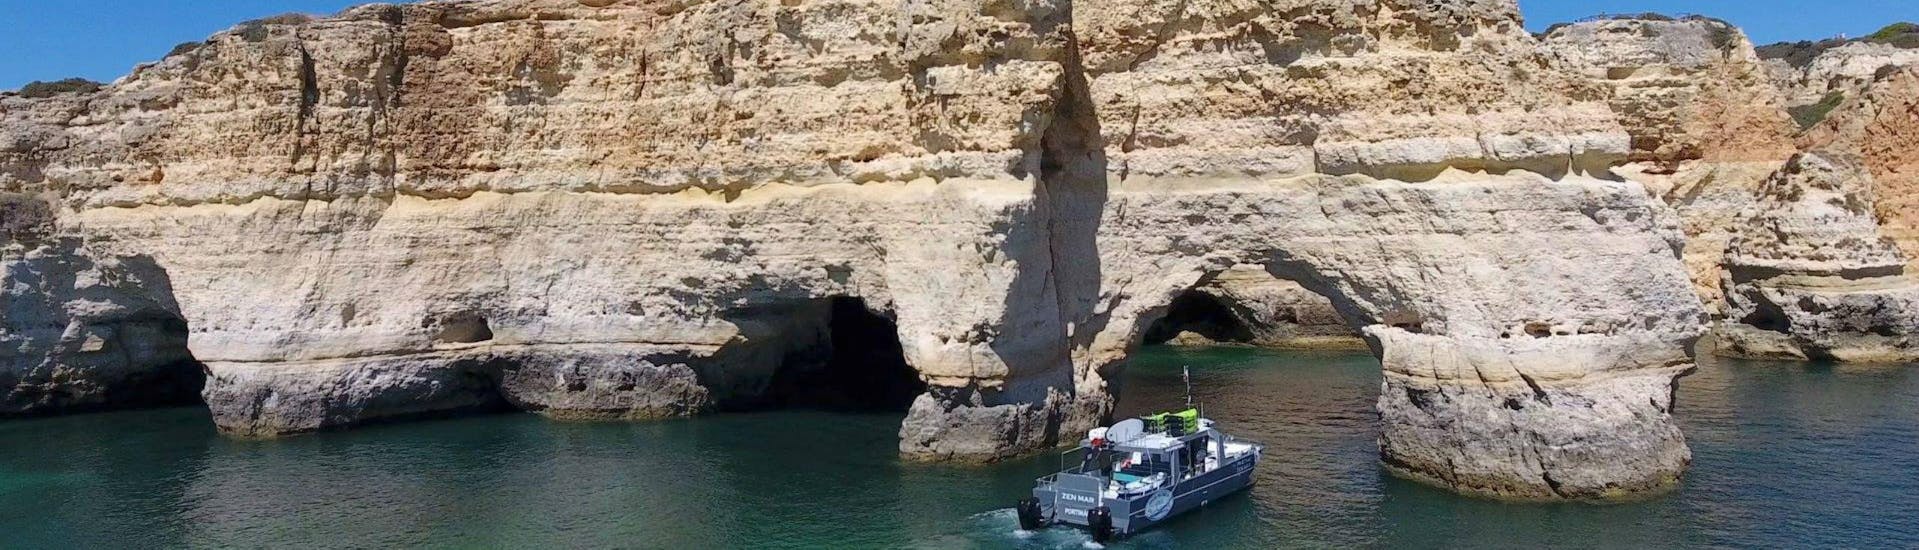 The catamaran operated by SeaAlgarve Albufeira is making its way along dramatic rock formations on the Algarve coast during the Benagil Boat Tour with Kayak or SUP.